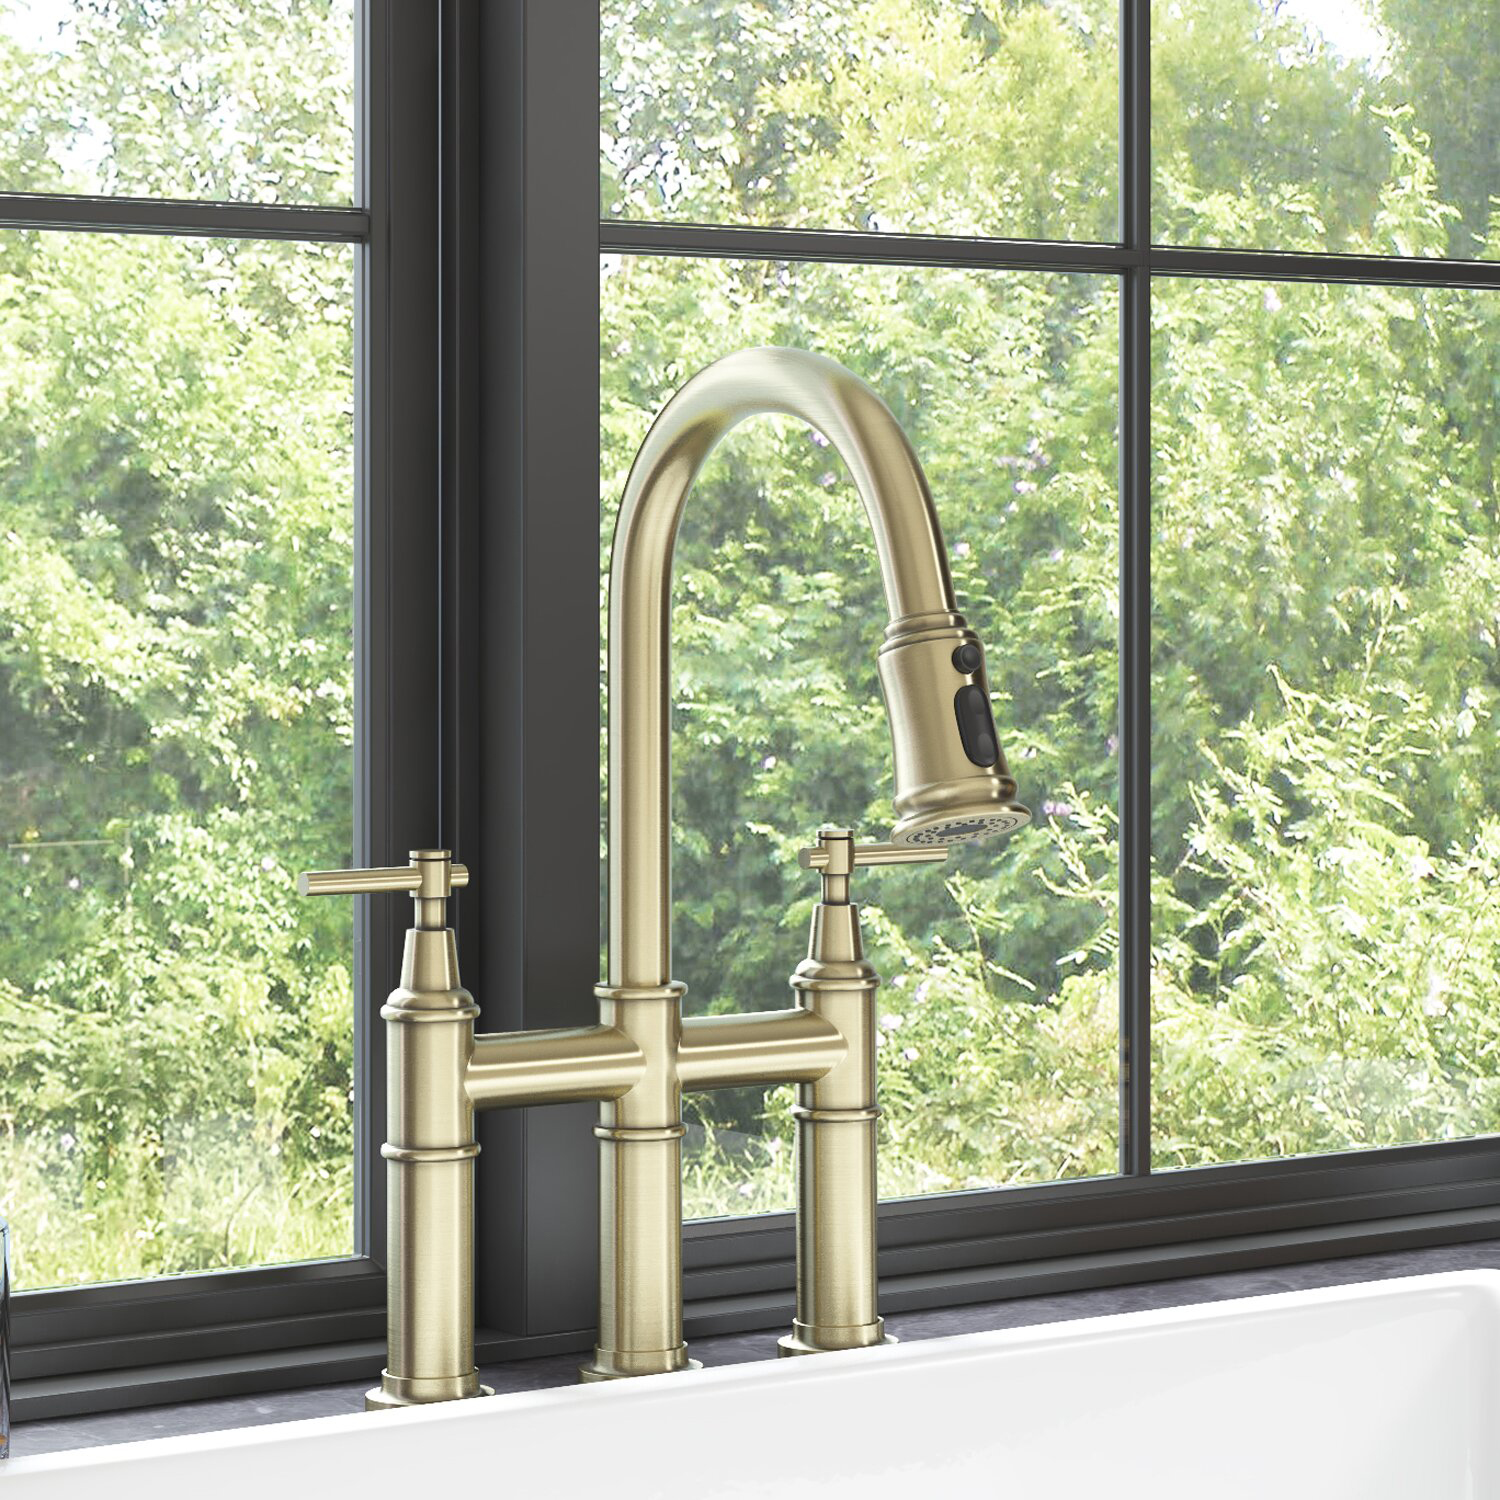 Aquacubic cUPC Brushed Gold Bridge Kitchen Faucet with Pull Down Sprayer 3 Hole Spot-Resistant Lead-Free Brass Kitchen Faucet 